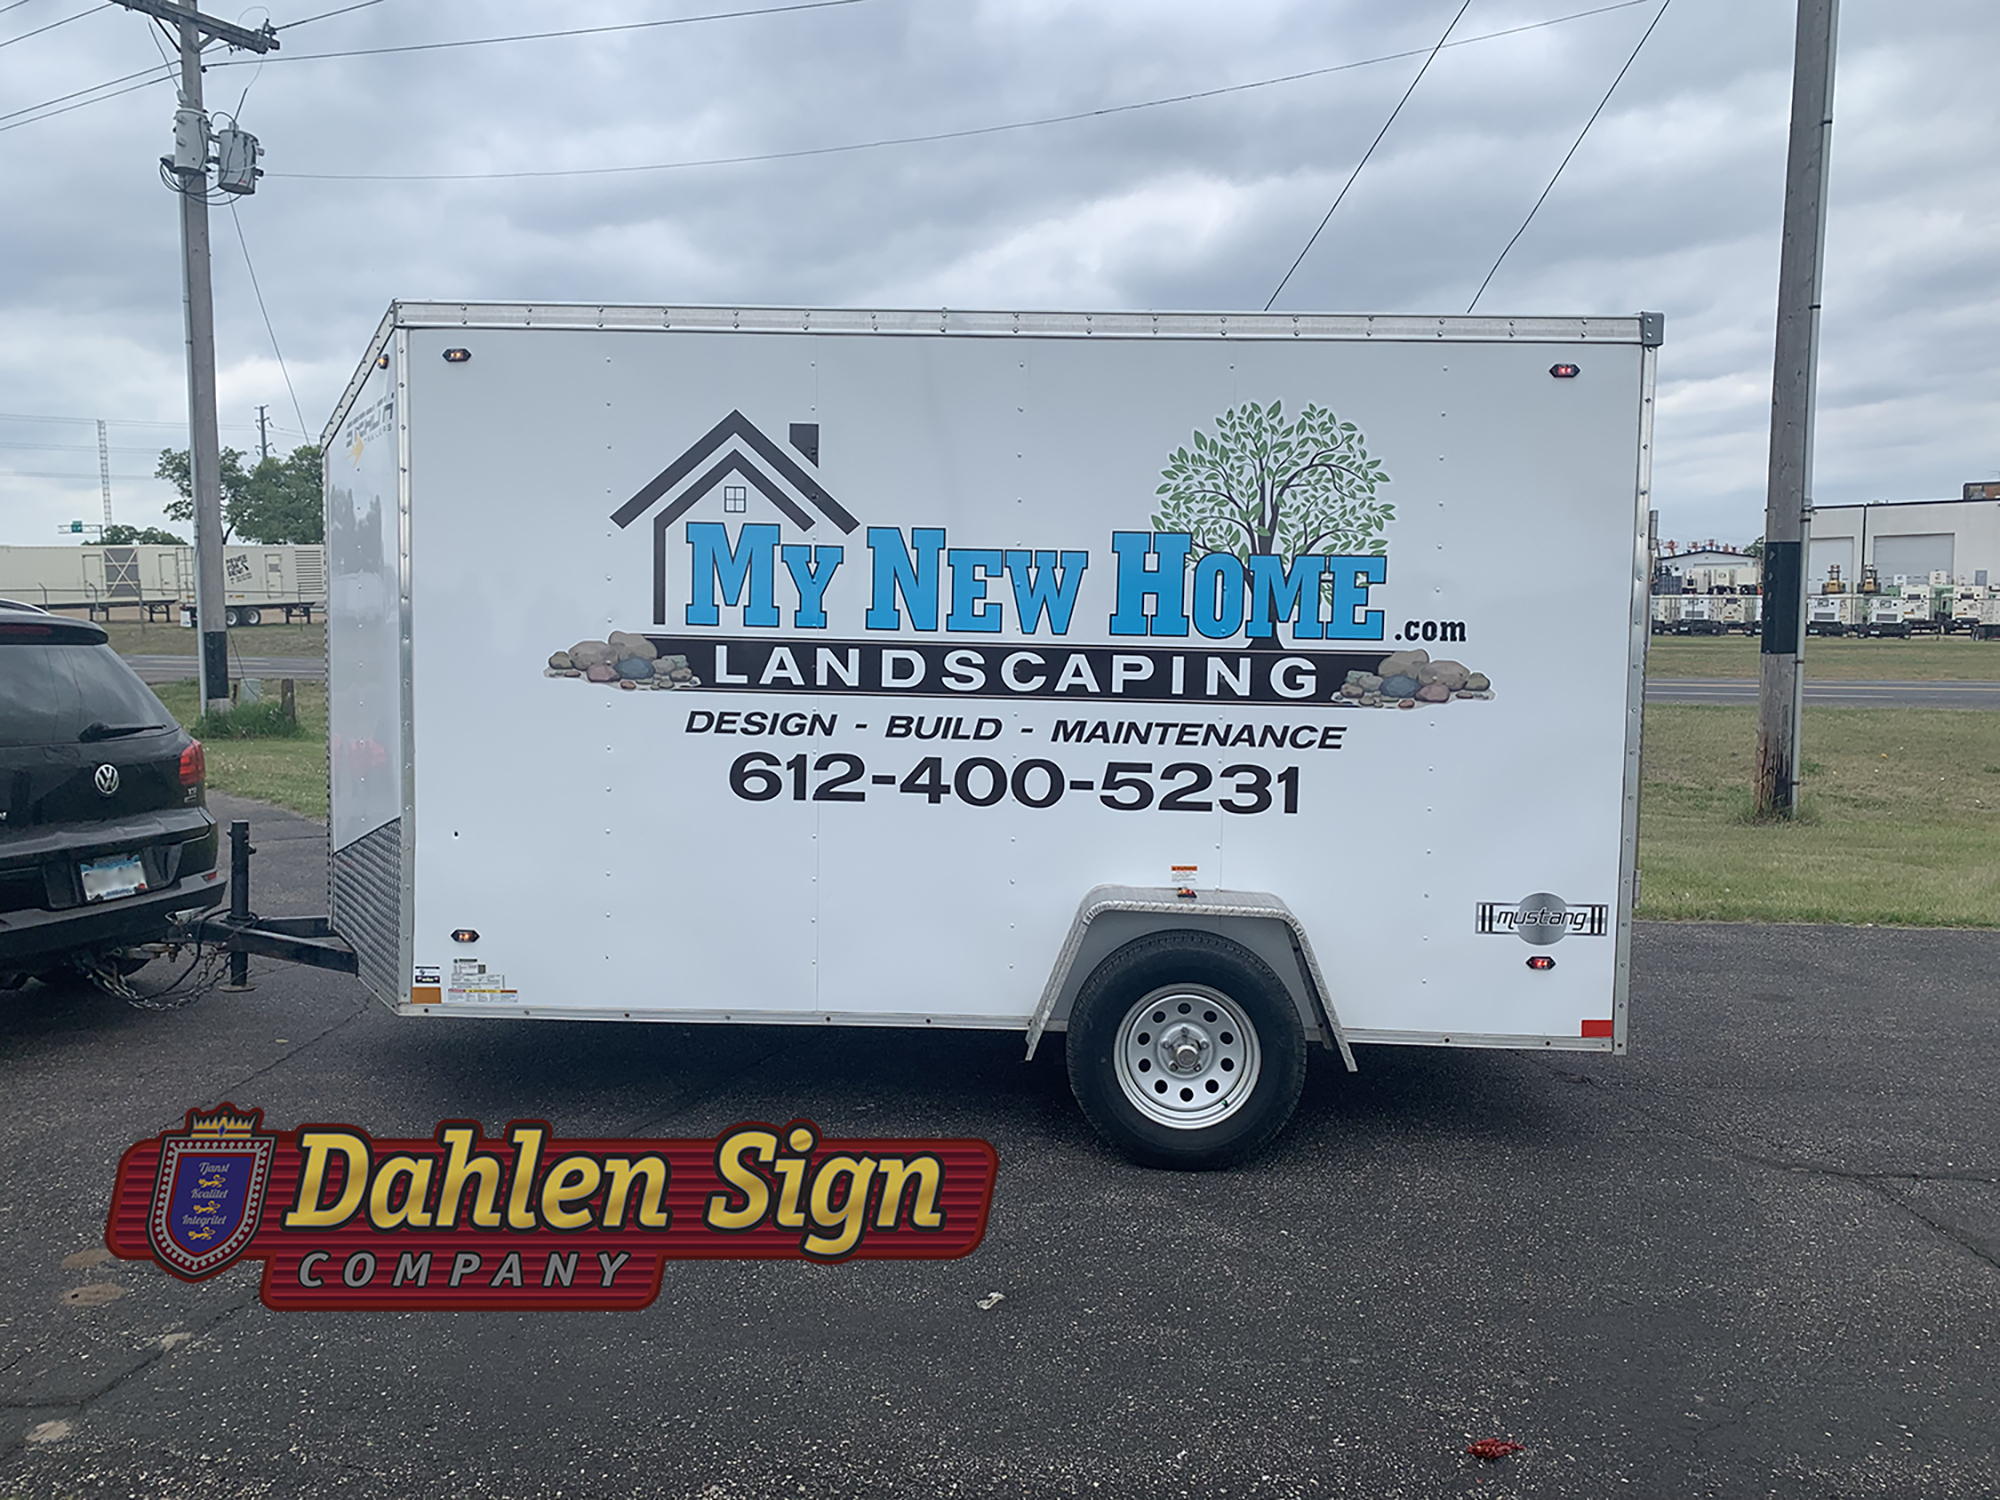 Custom vinyl trailer graphic designed for My New Home Landscaping by Dahlen Sign Company